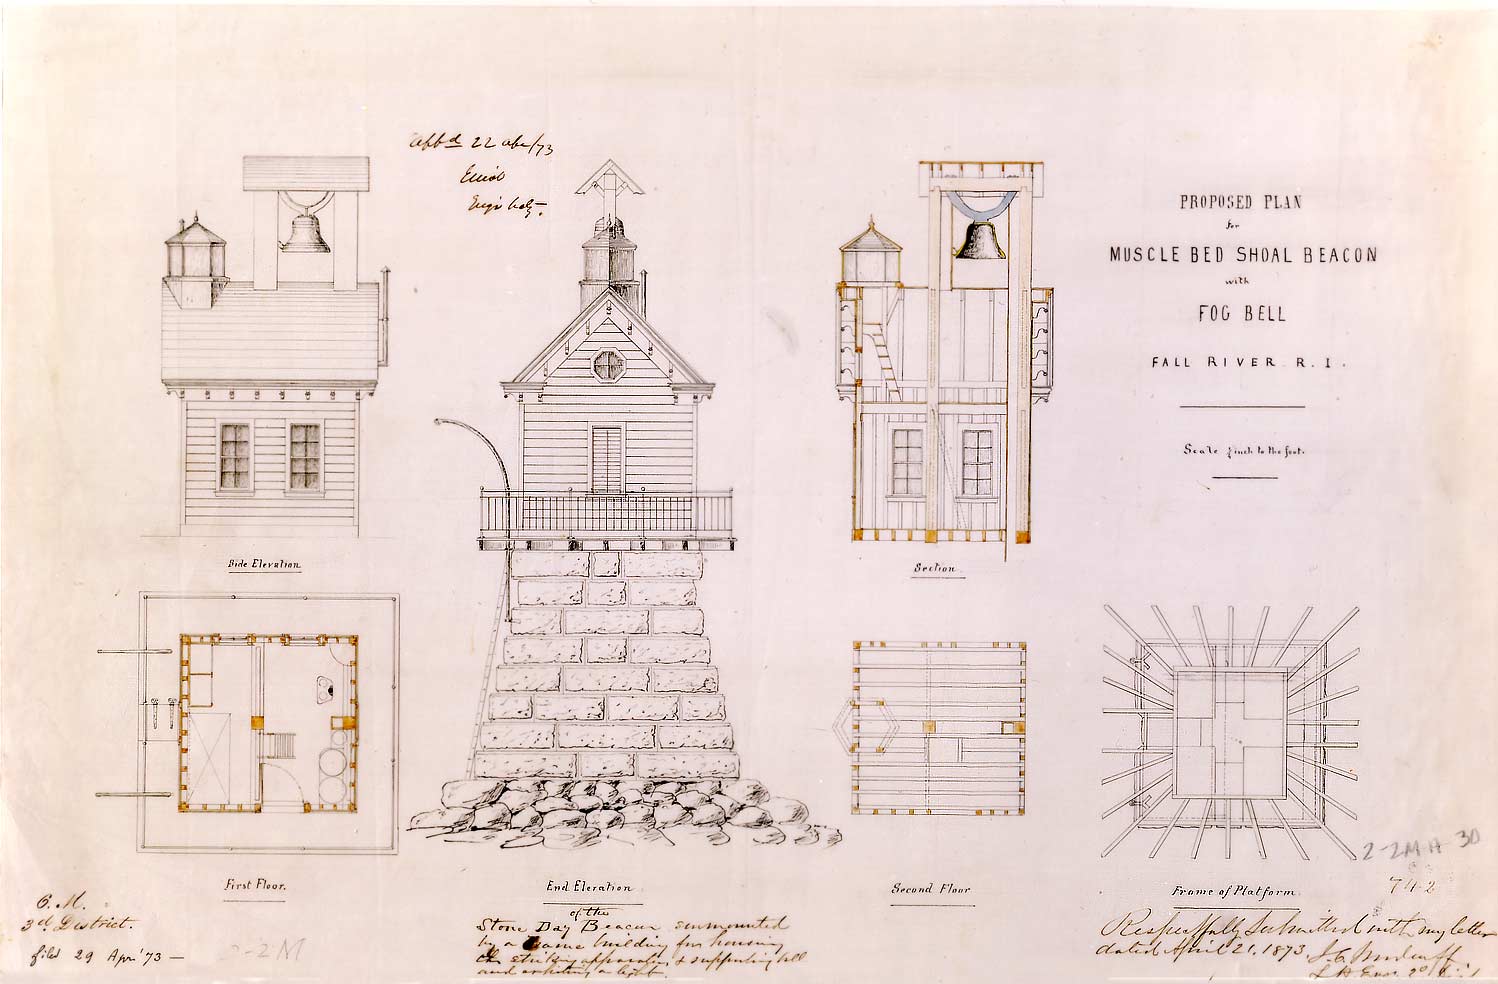 Plan for Musselbed Shoals Lighthouse